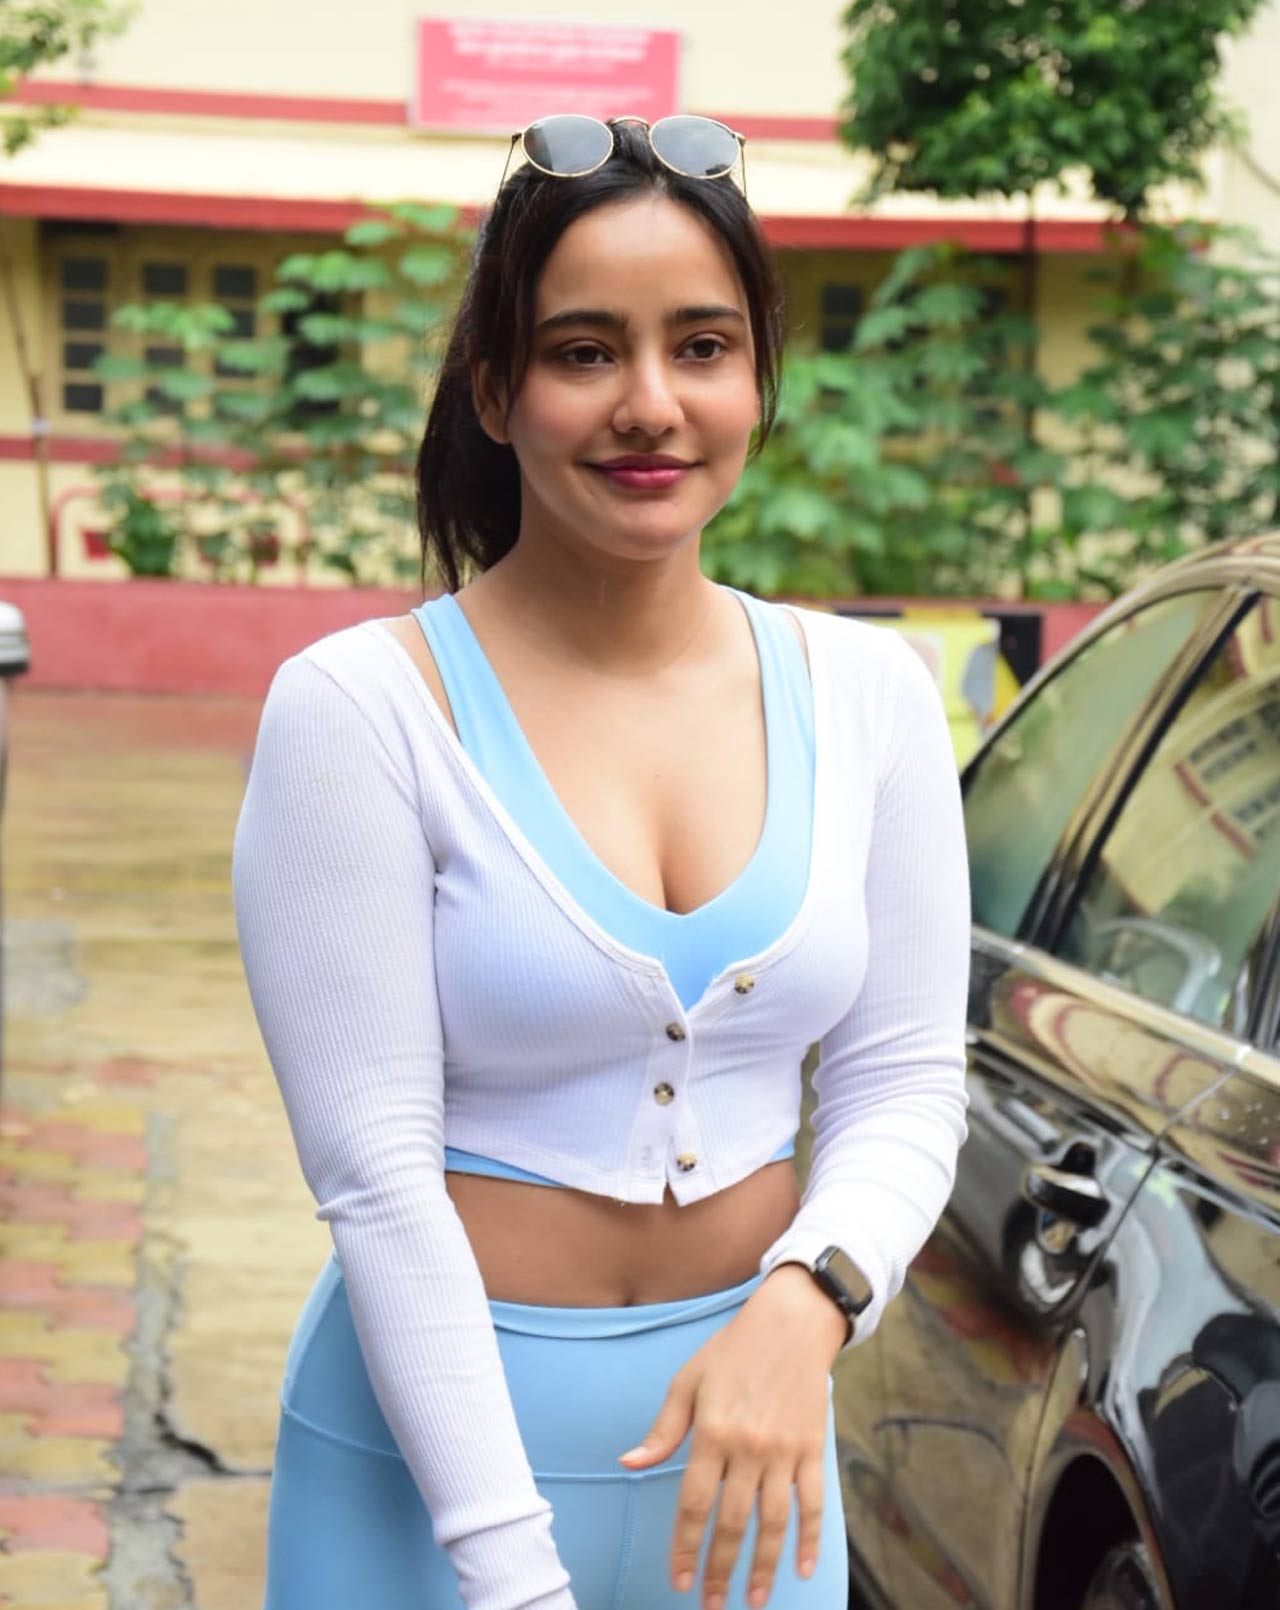 For those unaware, Neha and Aisha Sharma are actors. Neha is best known for her roles in 'Crook', 'Yamla Pagla Deewana 2', and 'Illegal' among others. On the other hand, Neha was seen sharing screen space with John Abraham in 'Satyameva Jayate'